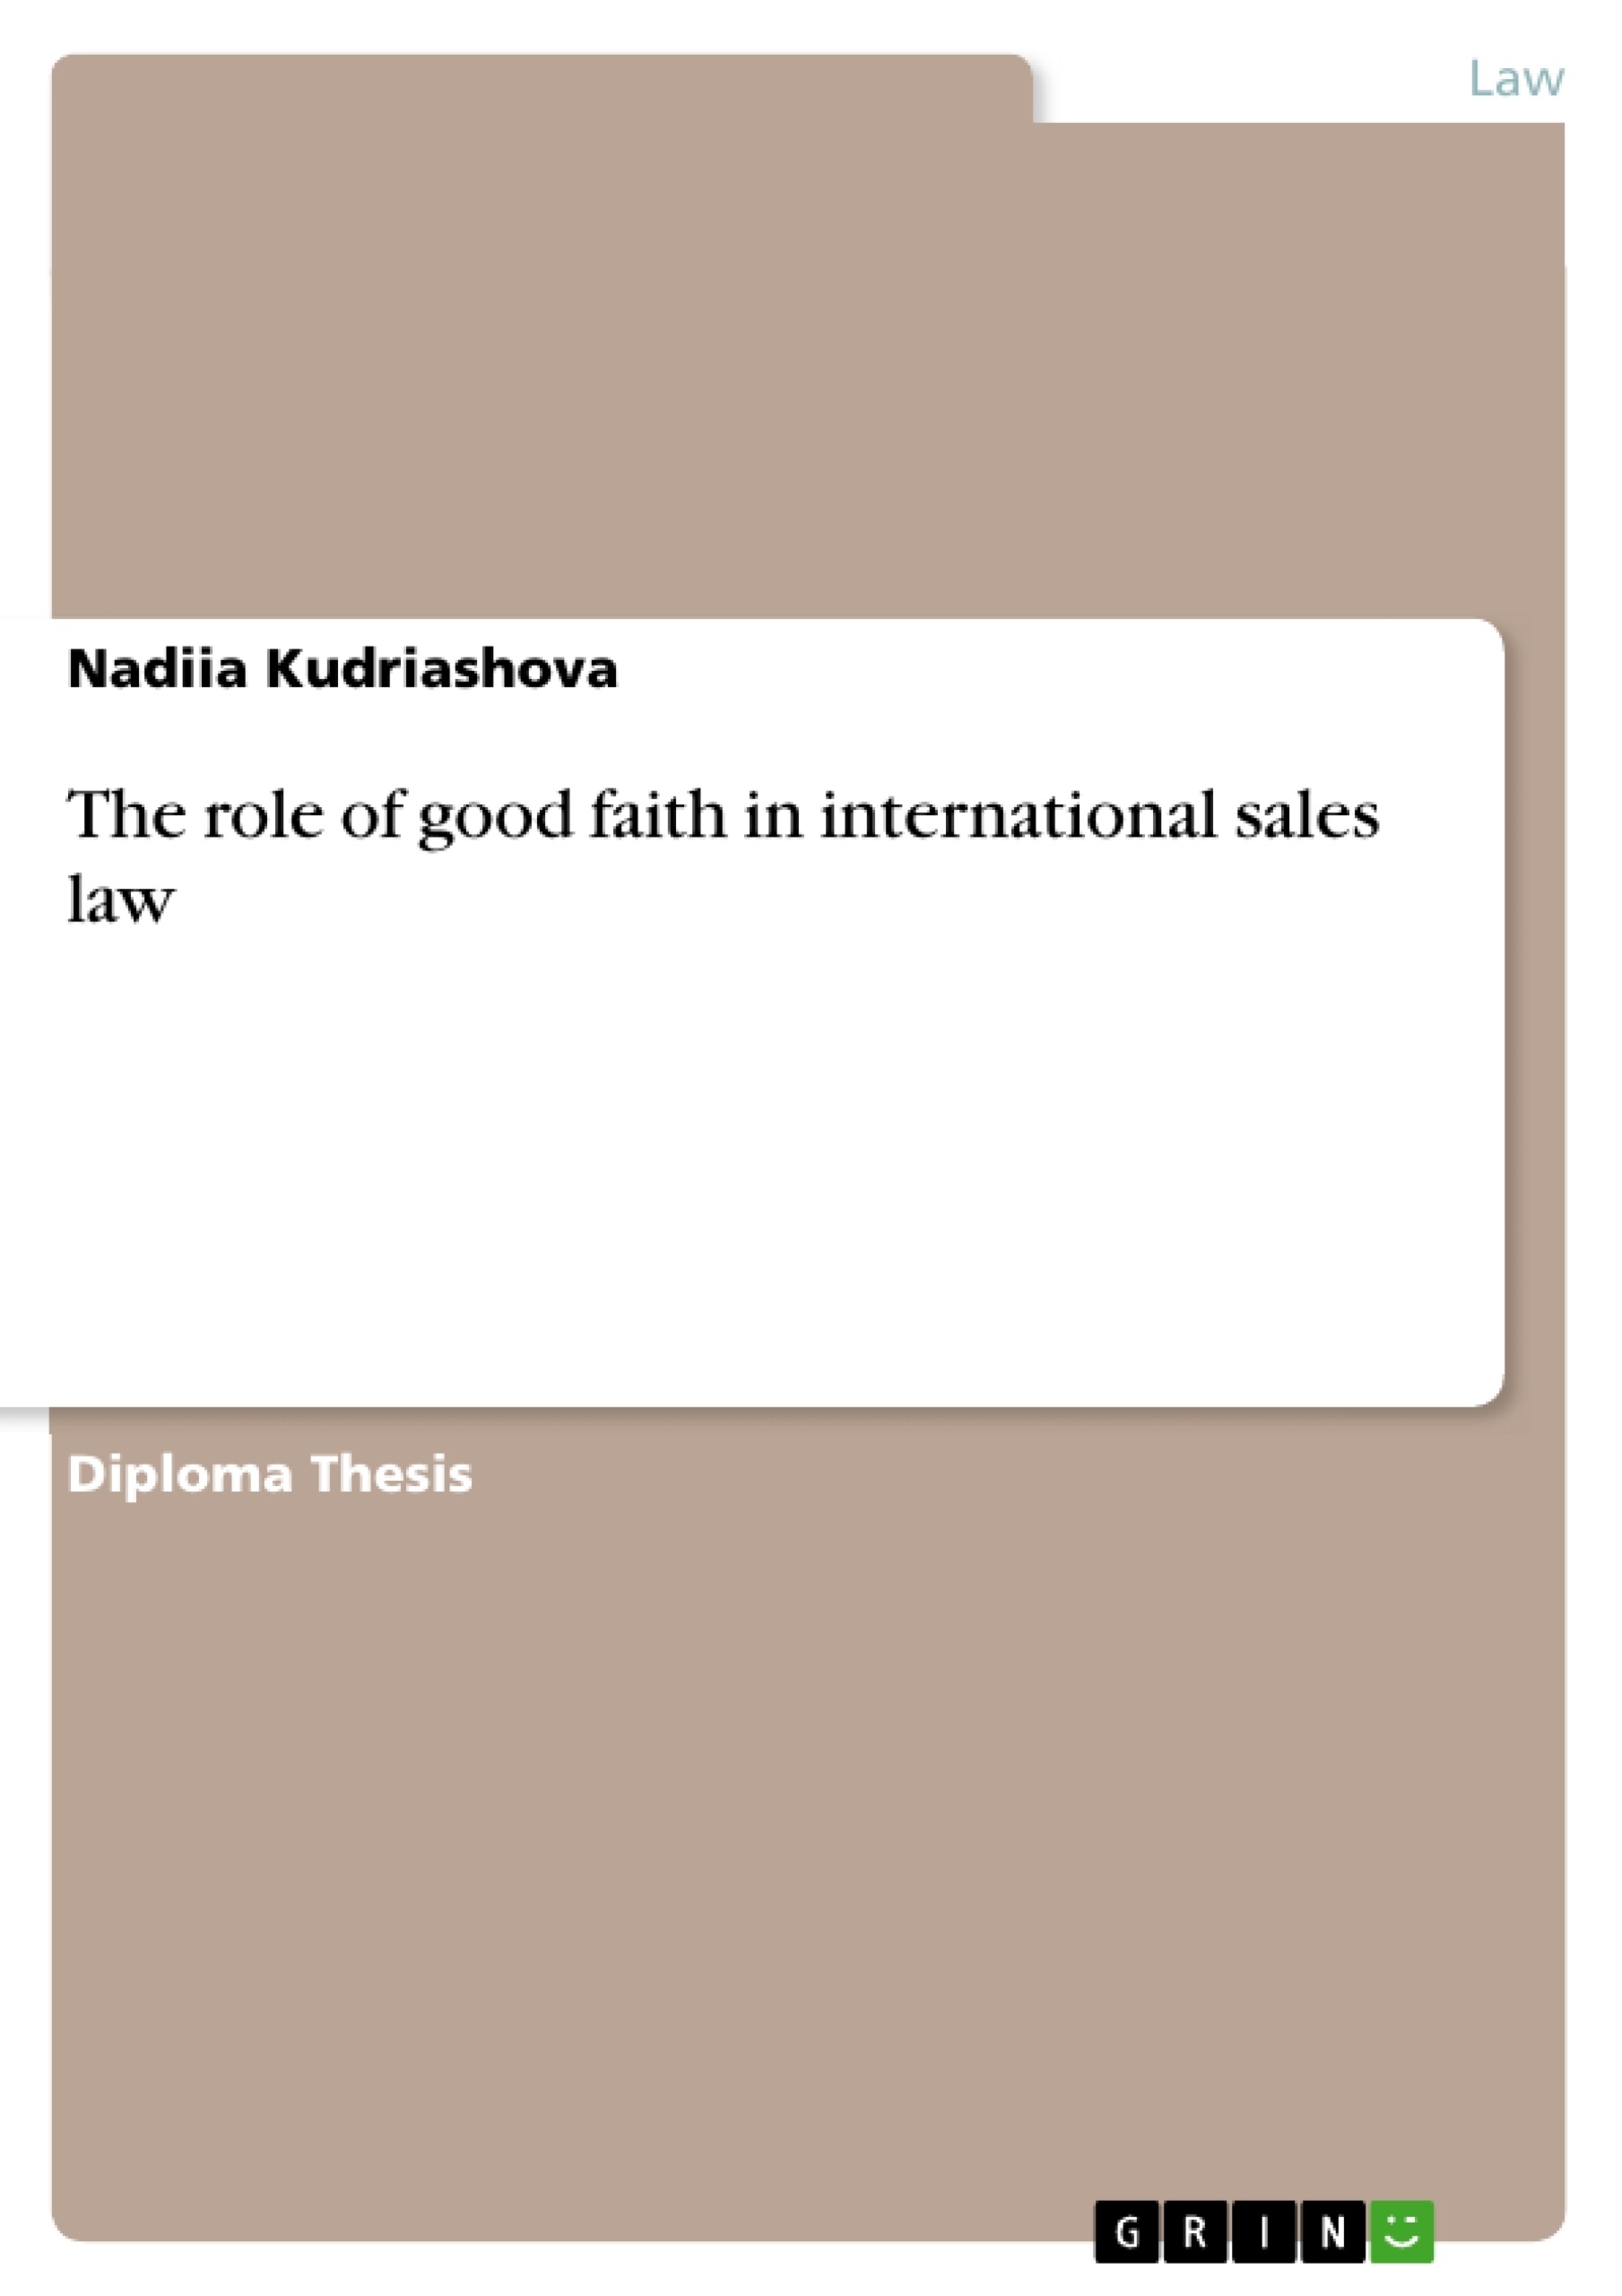 Título: The role of good faith in international sales law